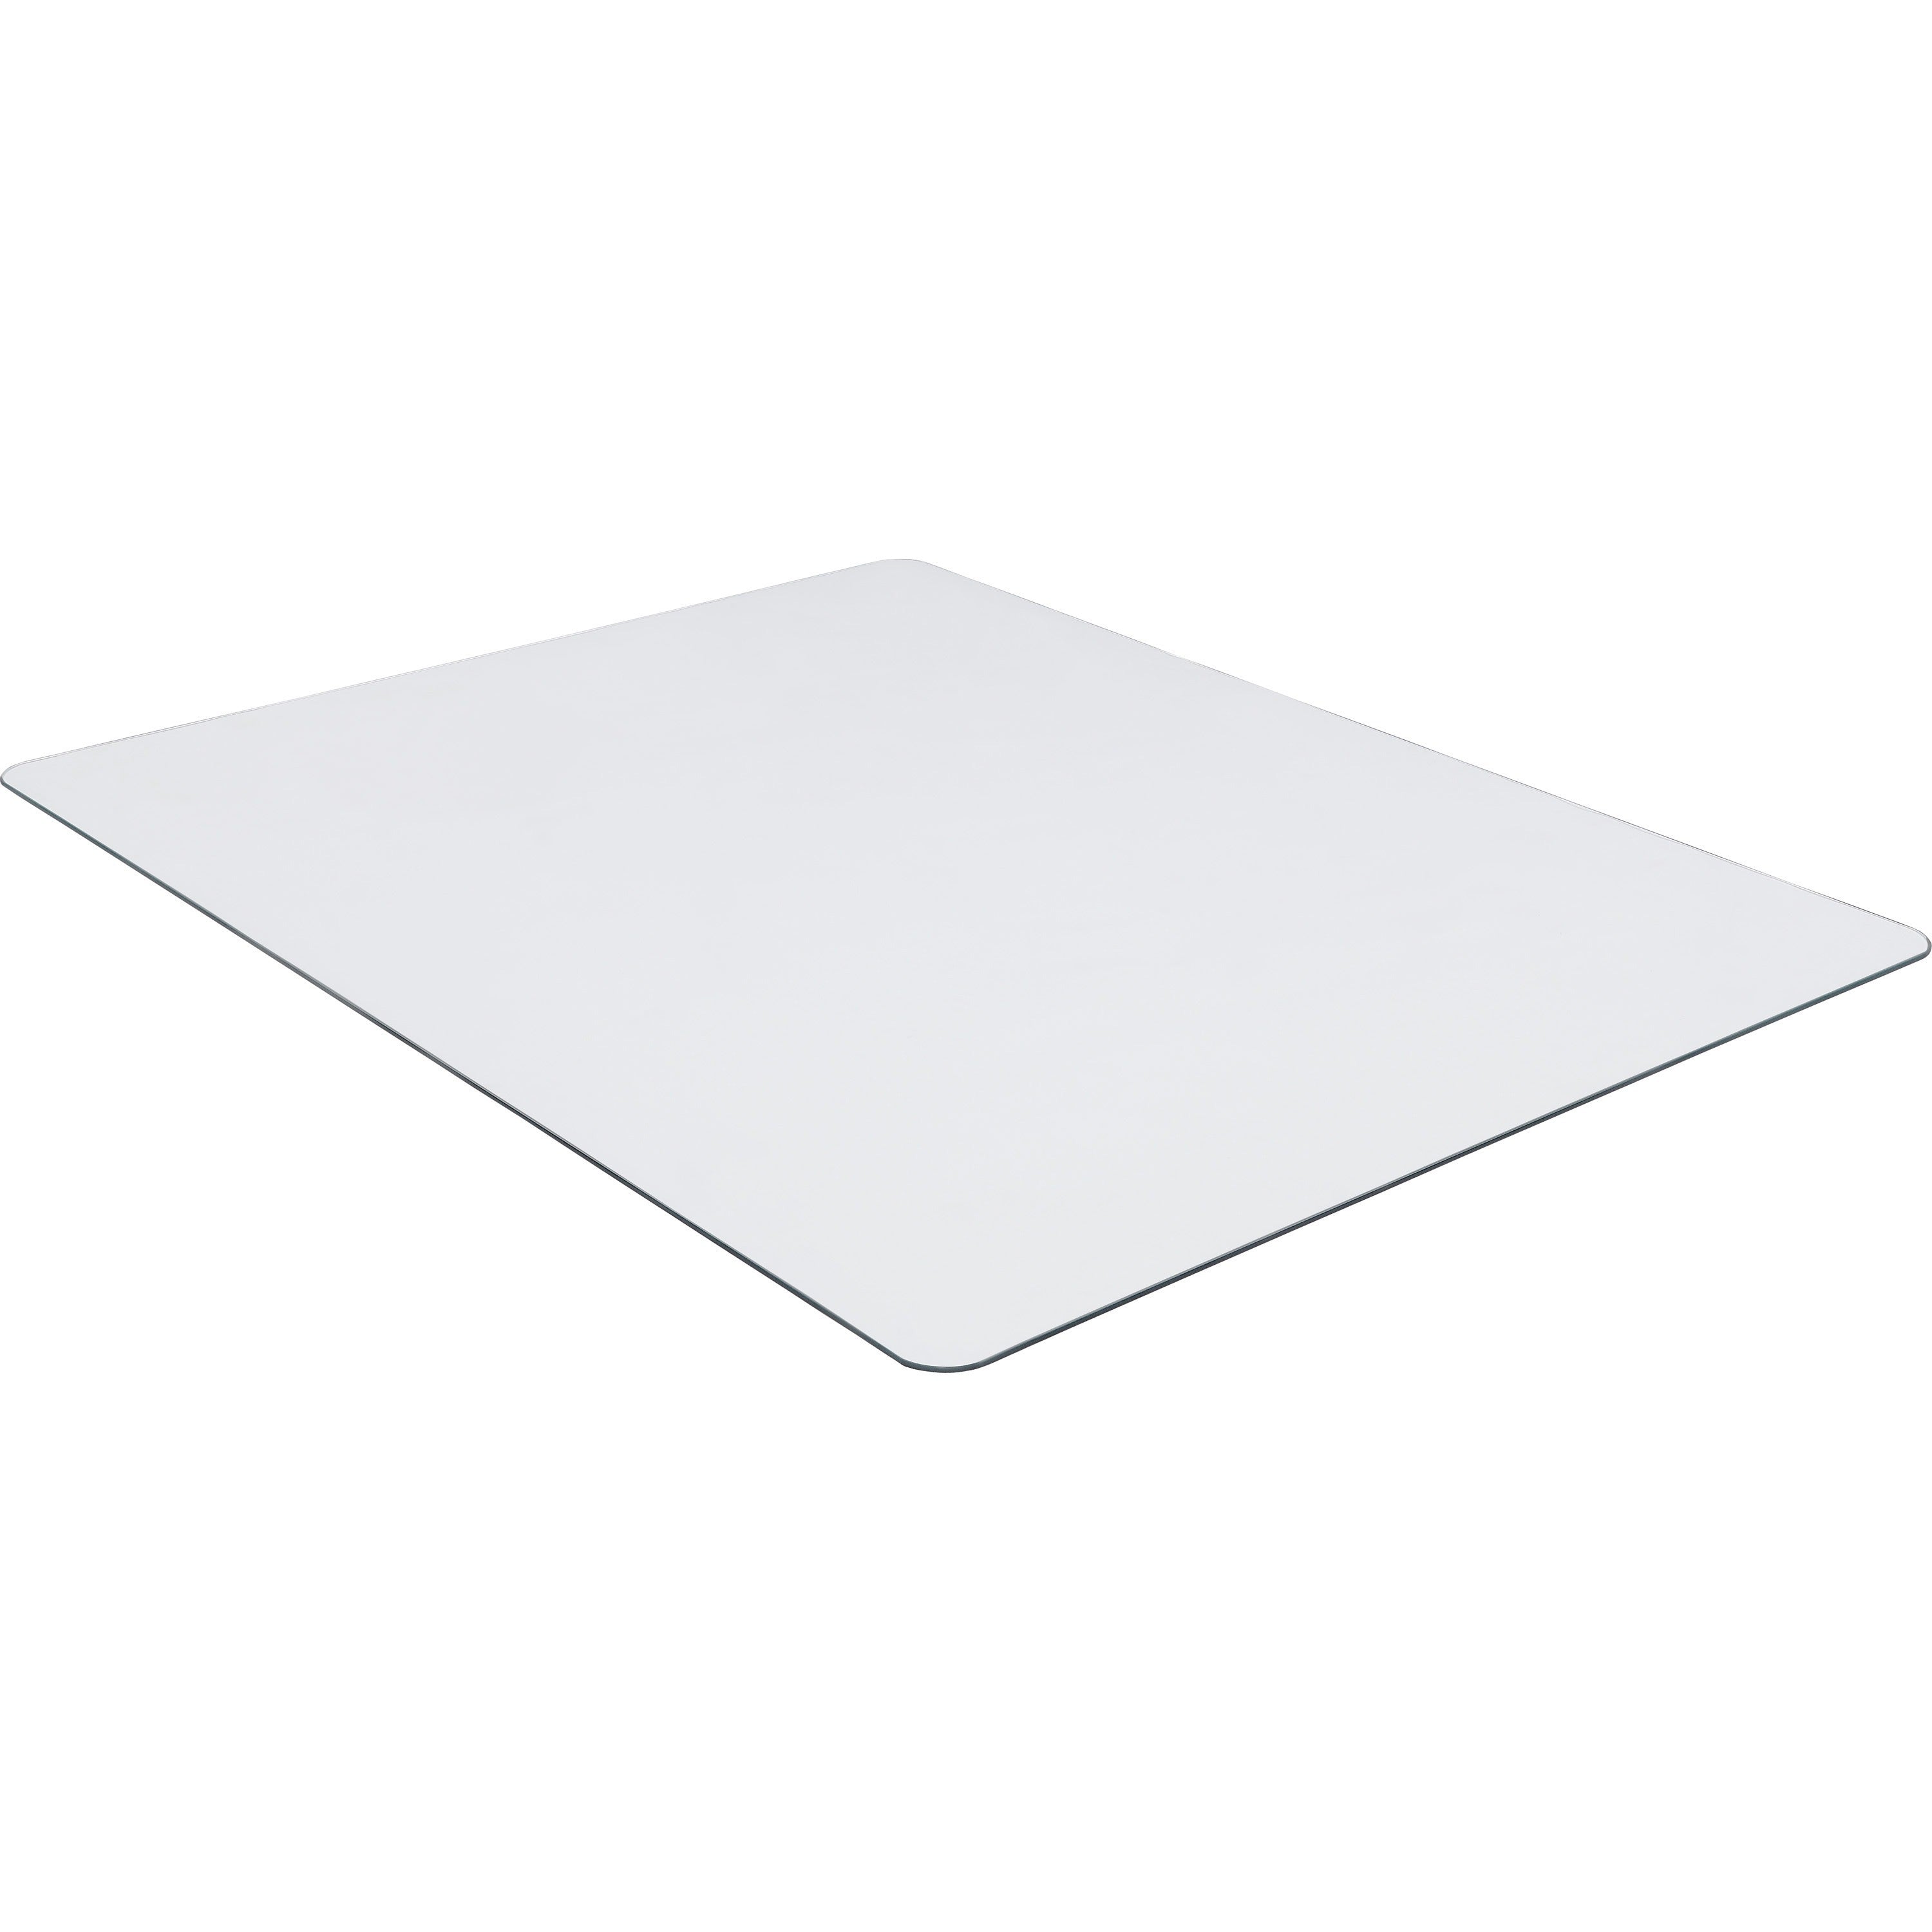 Lorell Tempered Glass Chairmat  60" Length x 48" Width x 0.25" Thickness - Rectangle - Tempered Glass - Clear